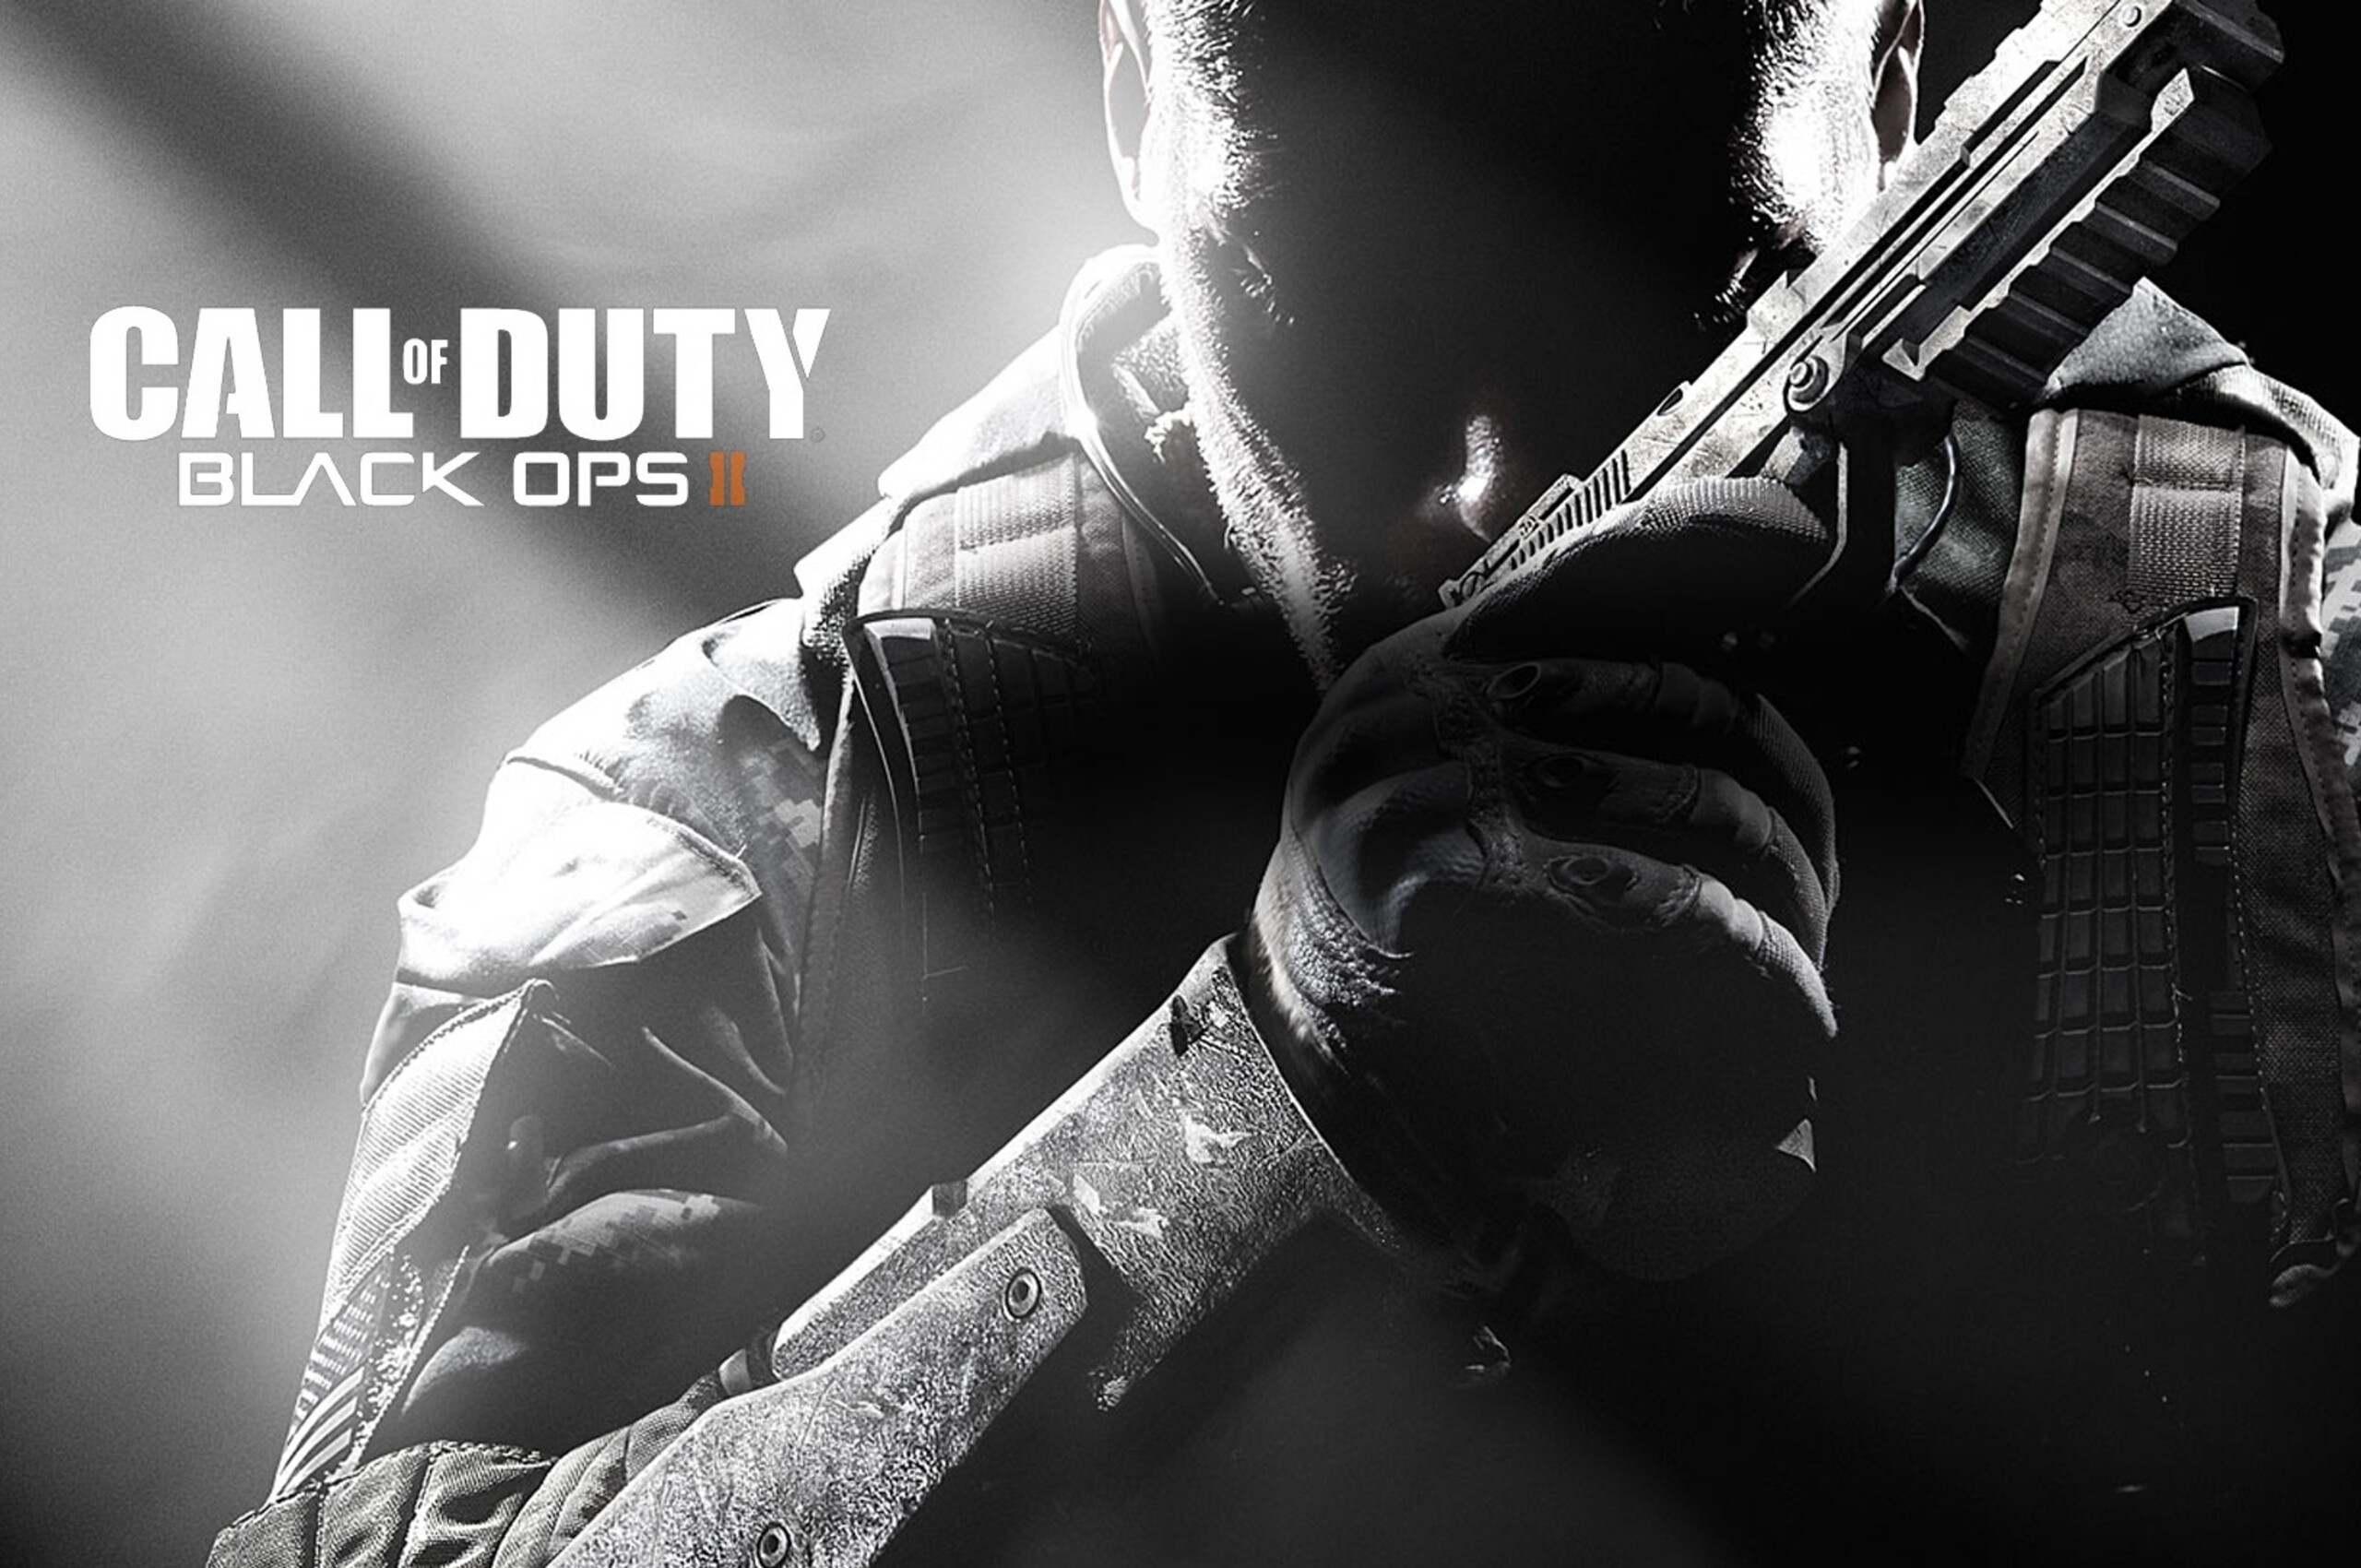 Call of Duty: CoD Black Ops 2, The ninth main installment in the series. 2560x1700 HD Wallpaper.